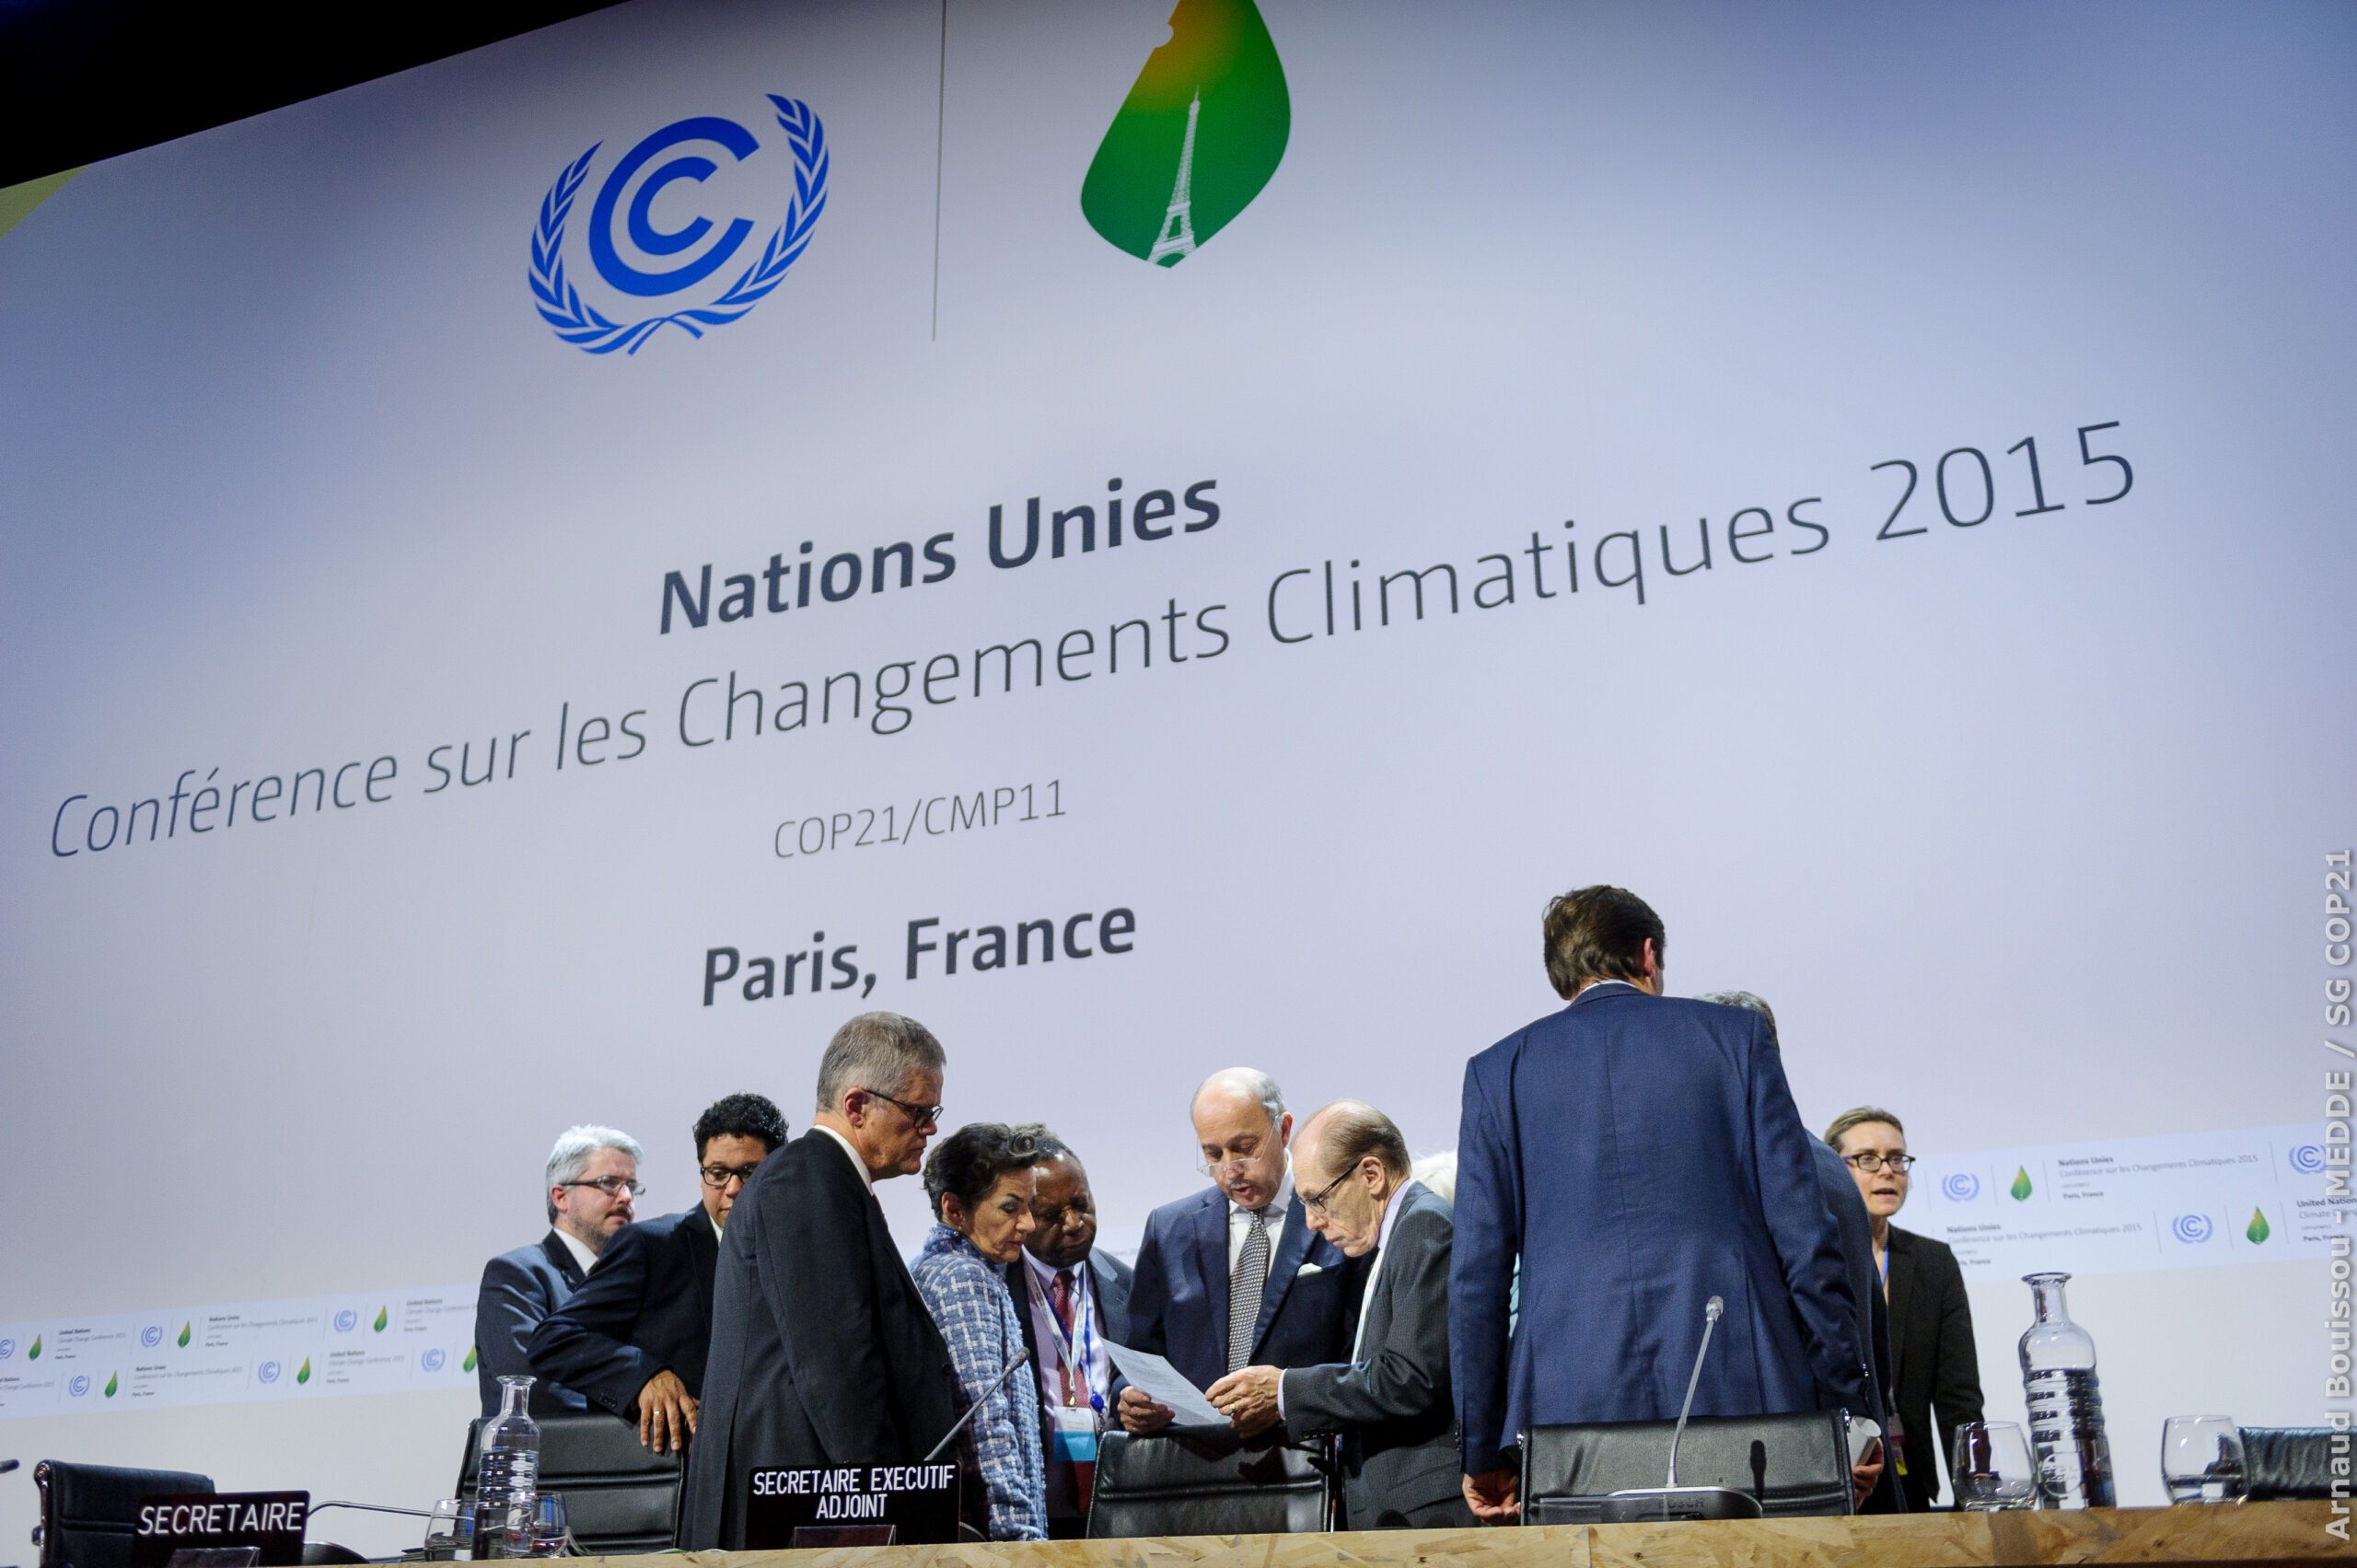 #COP21: 5 things you must know about the Paris climate deal